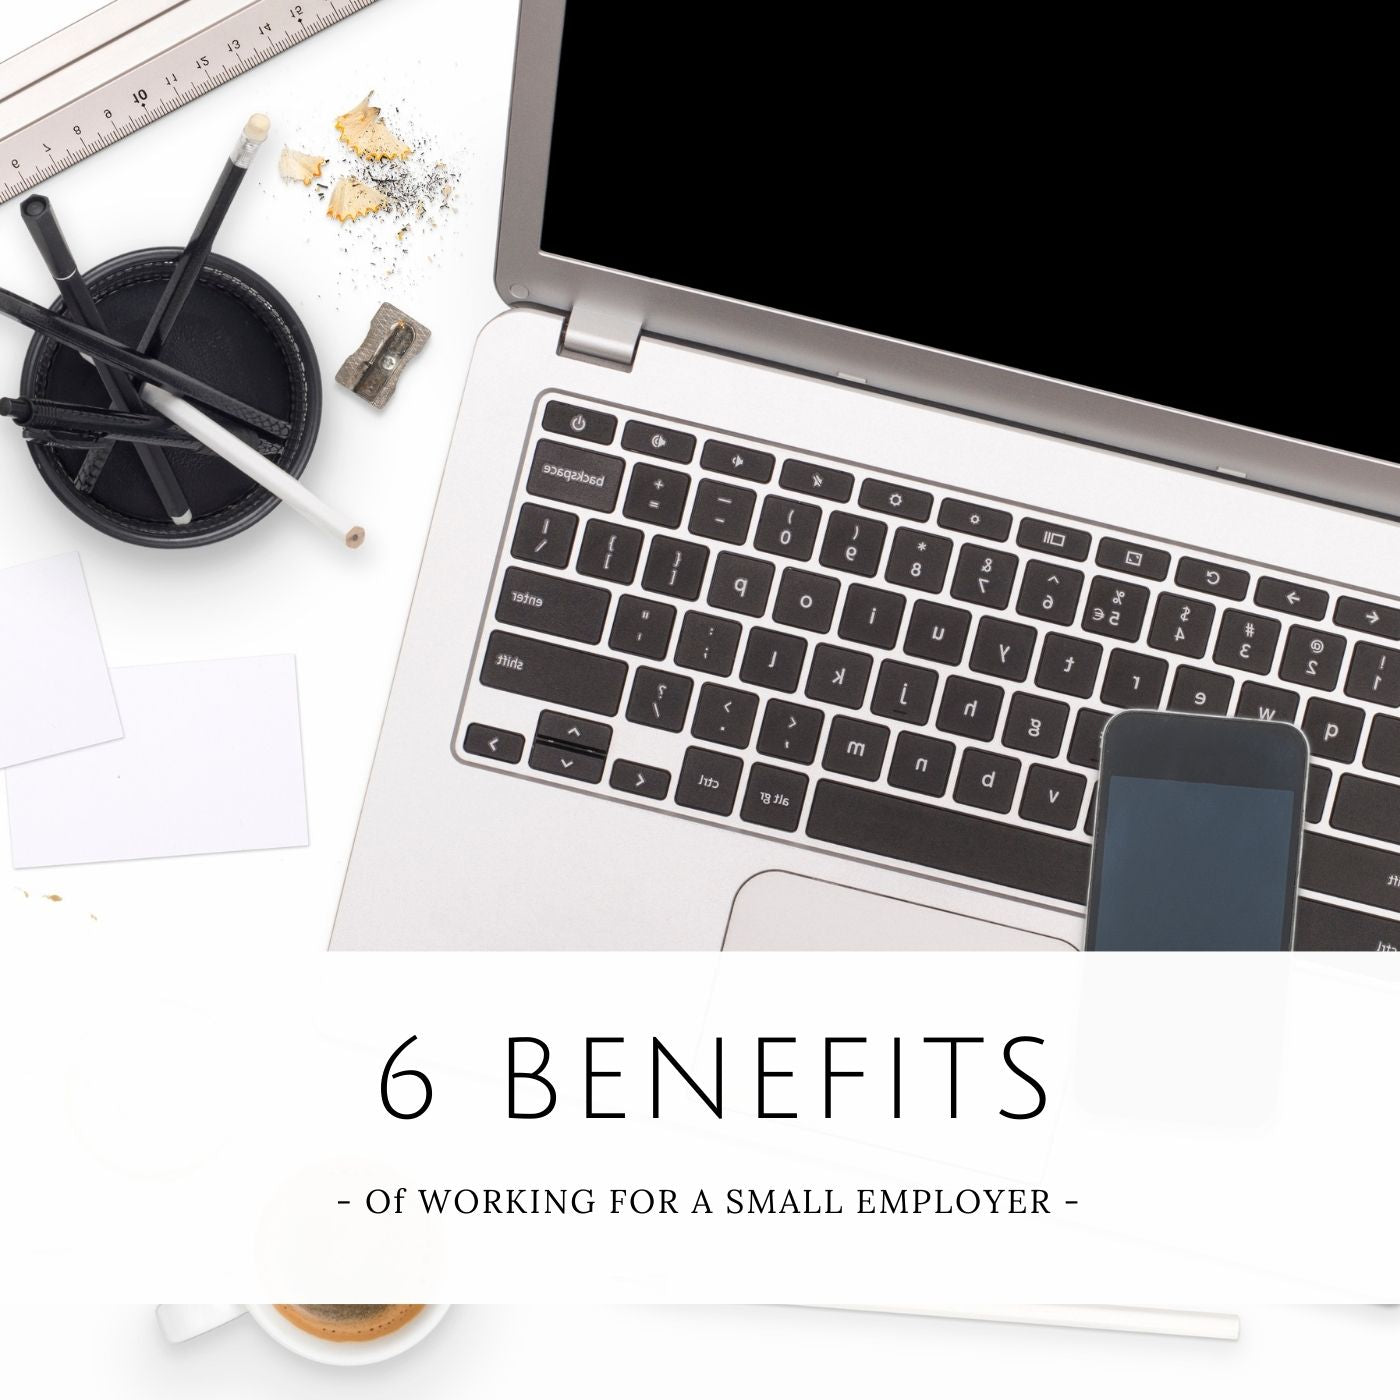 6 Benefits of Working for a small employer